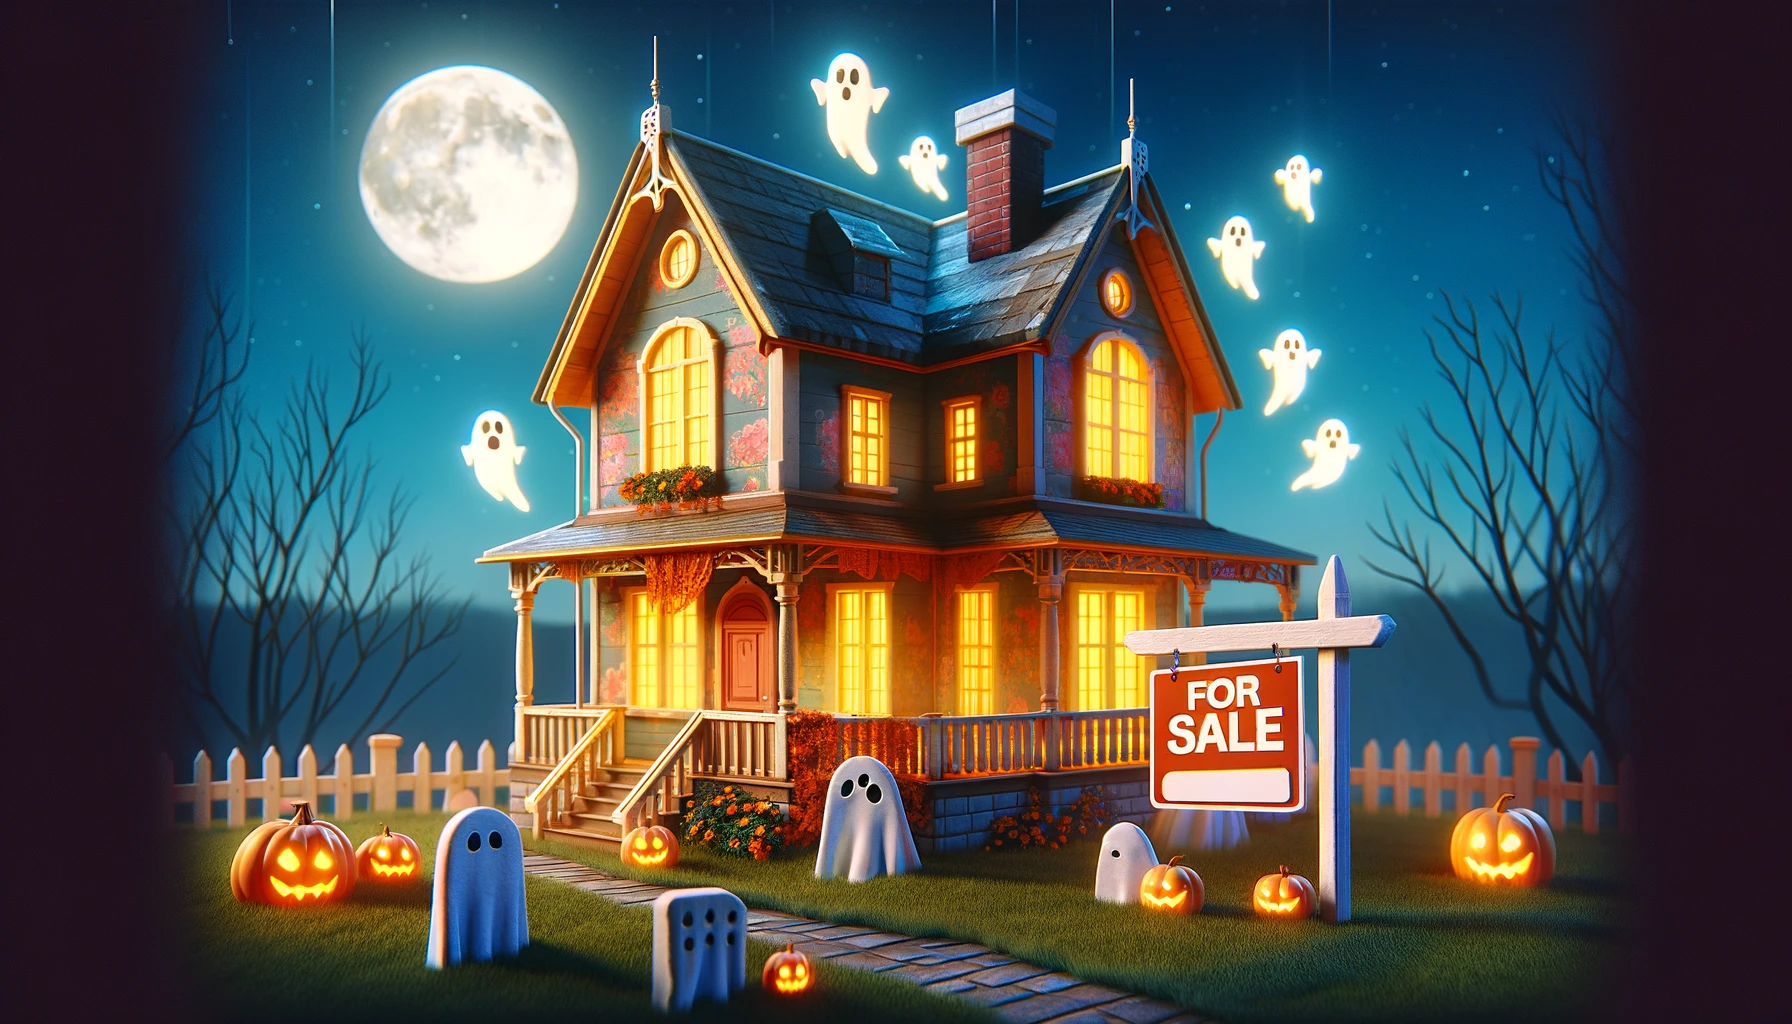 How to Sell a Haunted House: A Spooktacular Guide for the Living